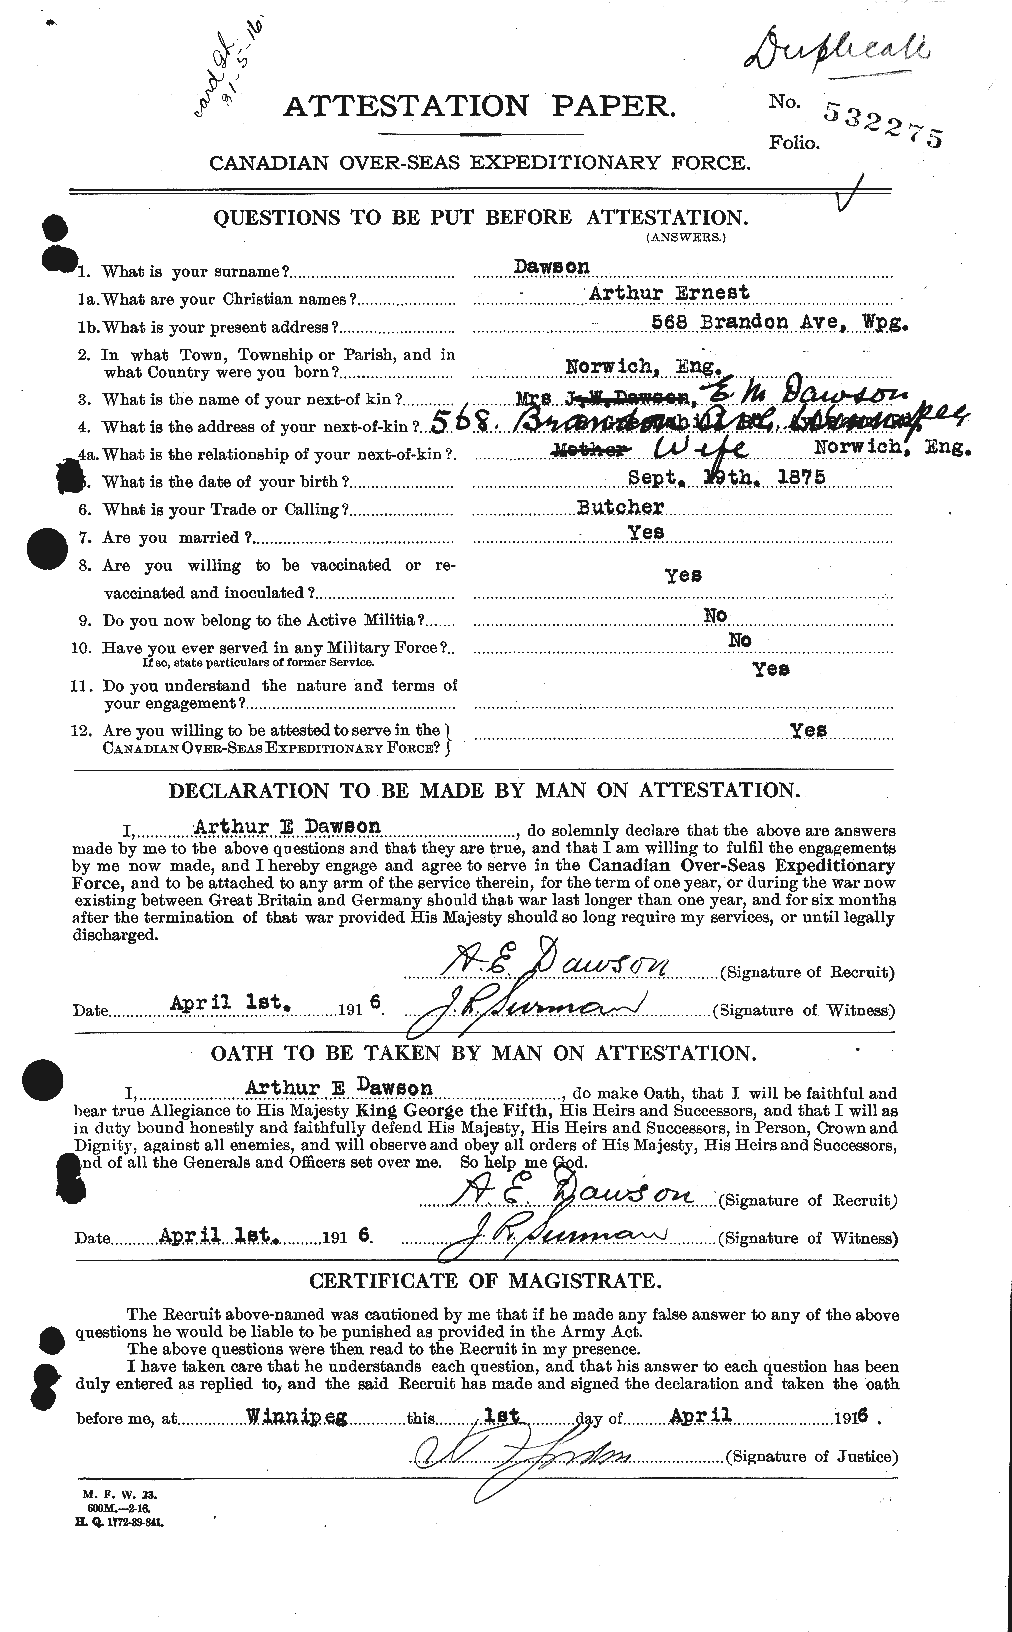 Personnel Records of the First World War - CEF 285066a